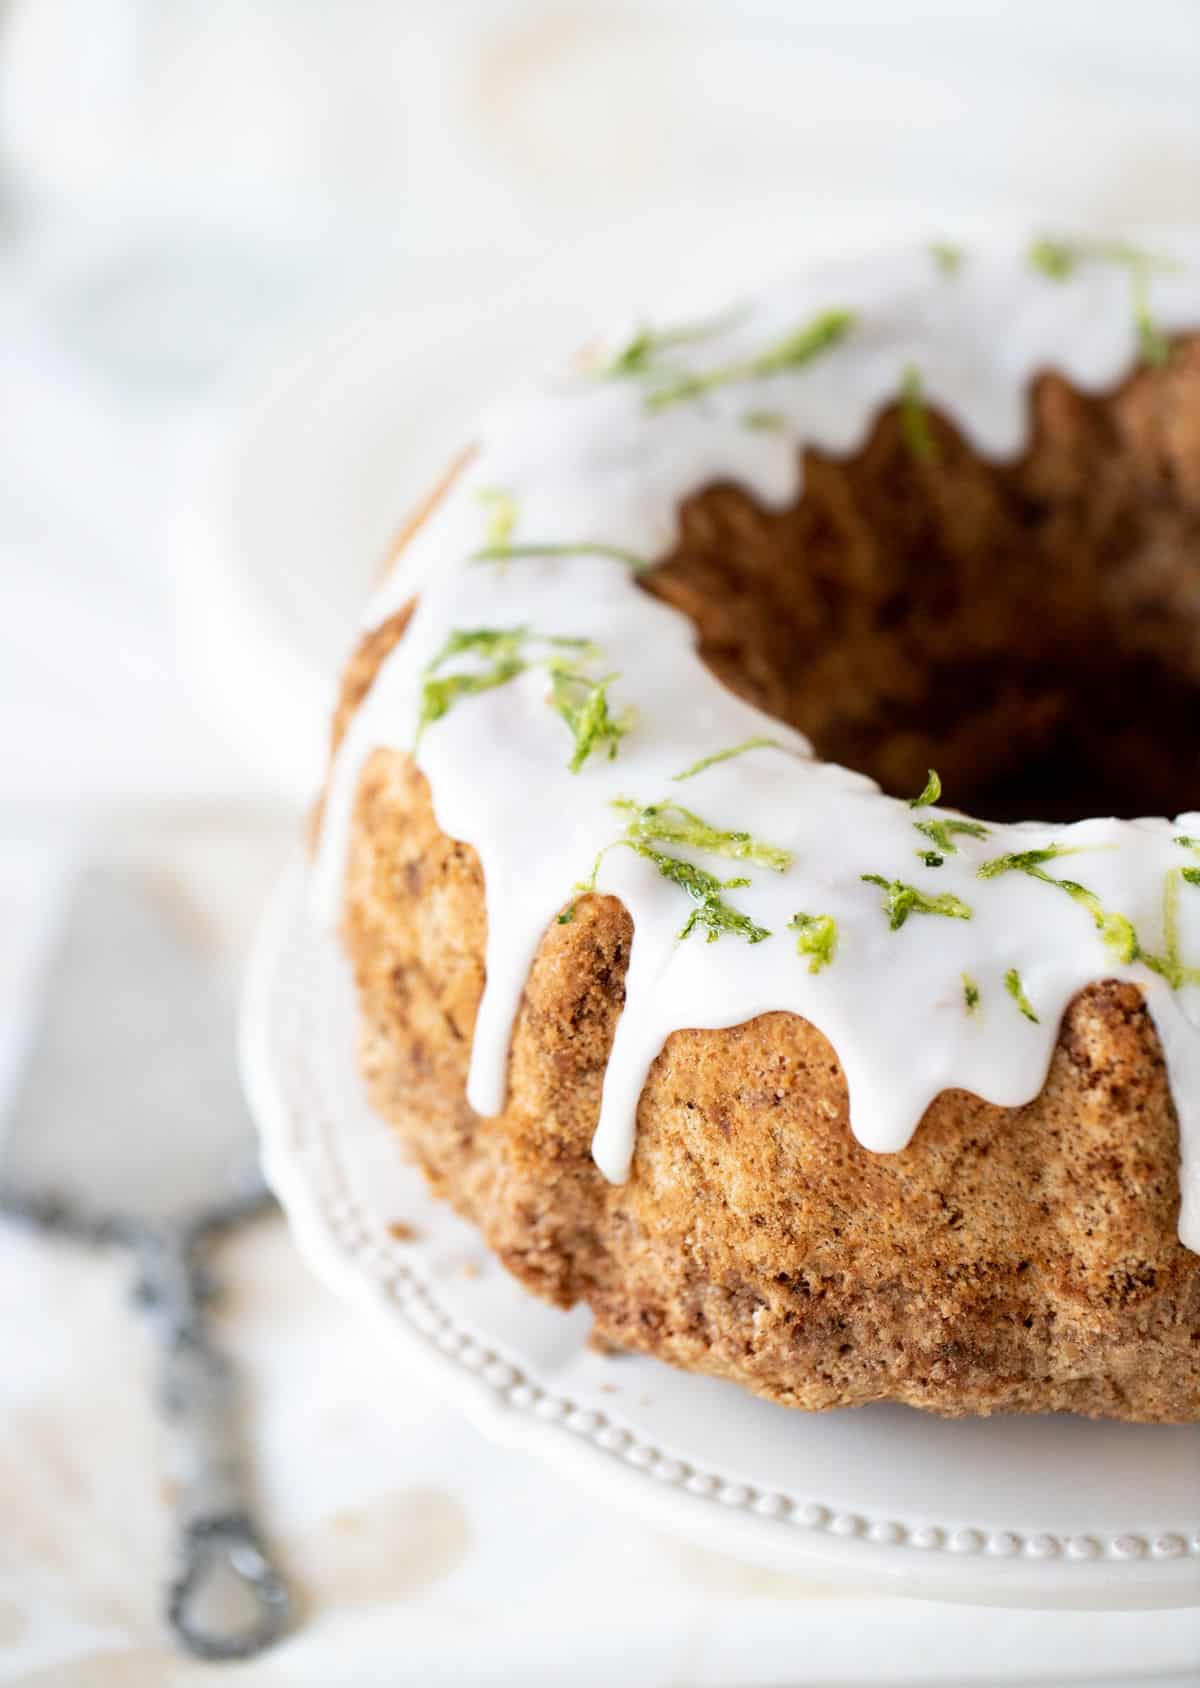 Top view of partial glazed bundt cake on white cake stand, silver cake server